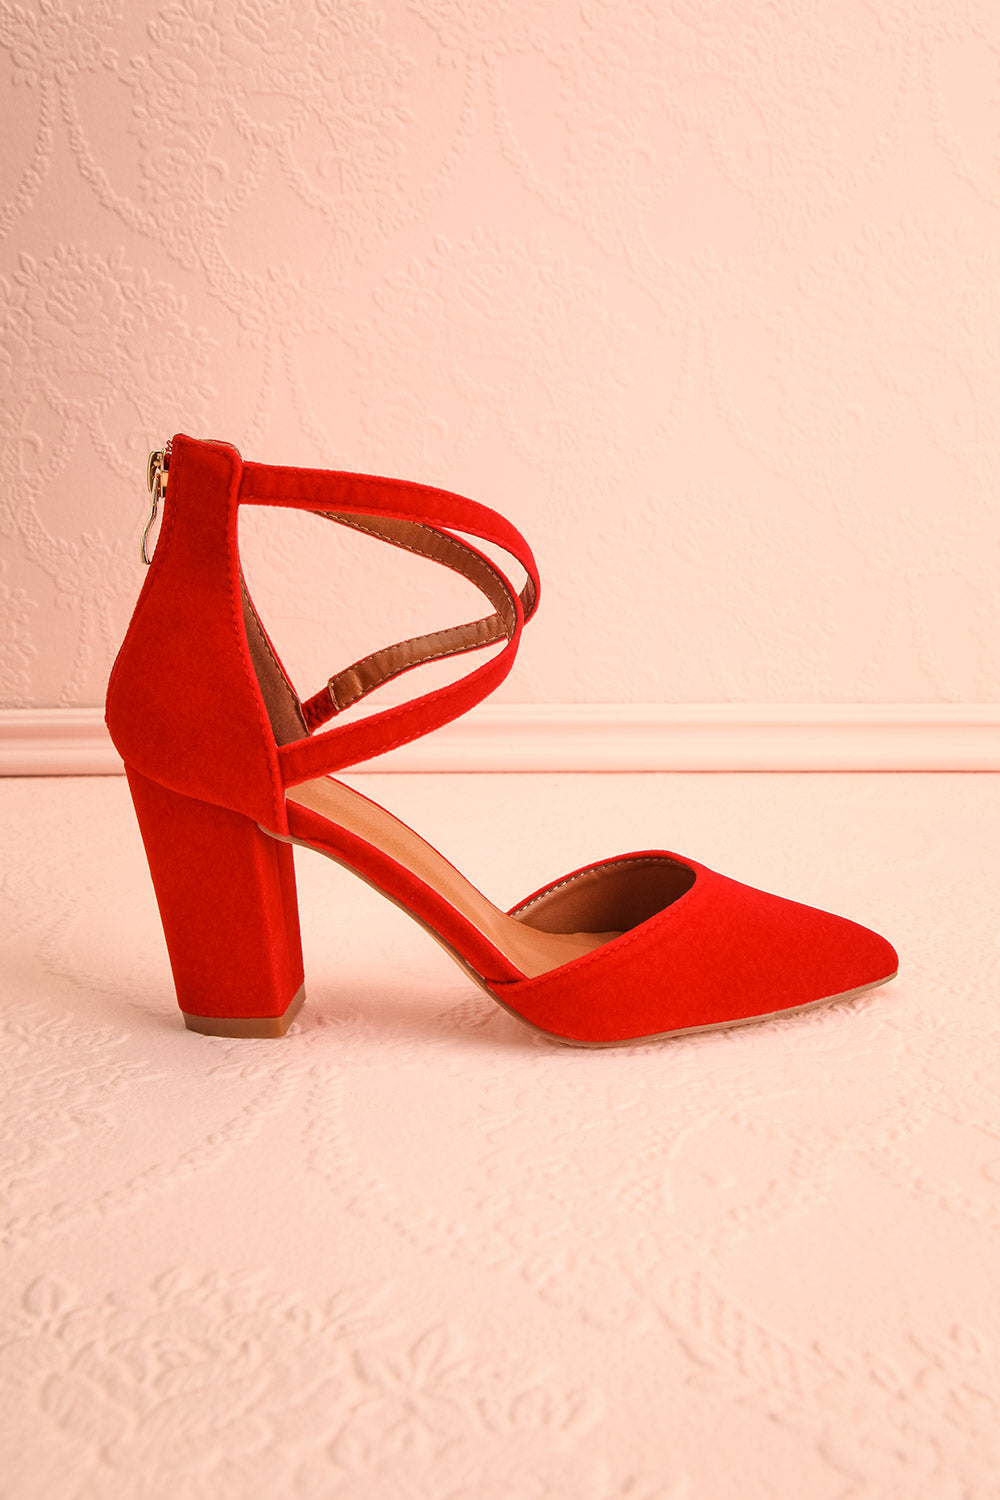 Charmhing Red Cross-Strap Pointed Toe Heels | Boutique 1861 side view